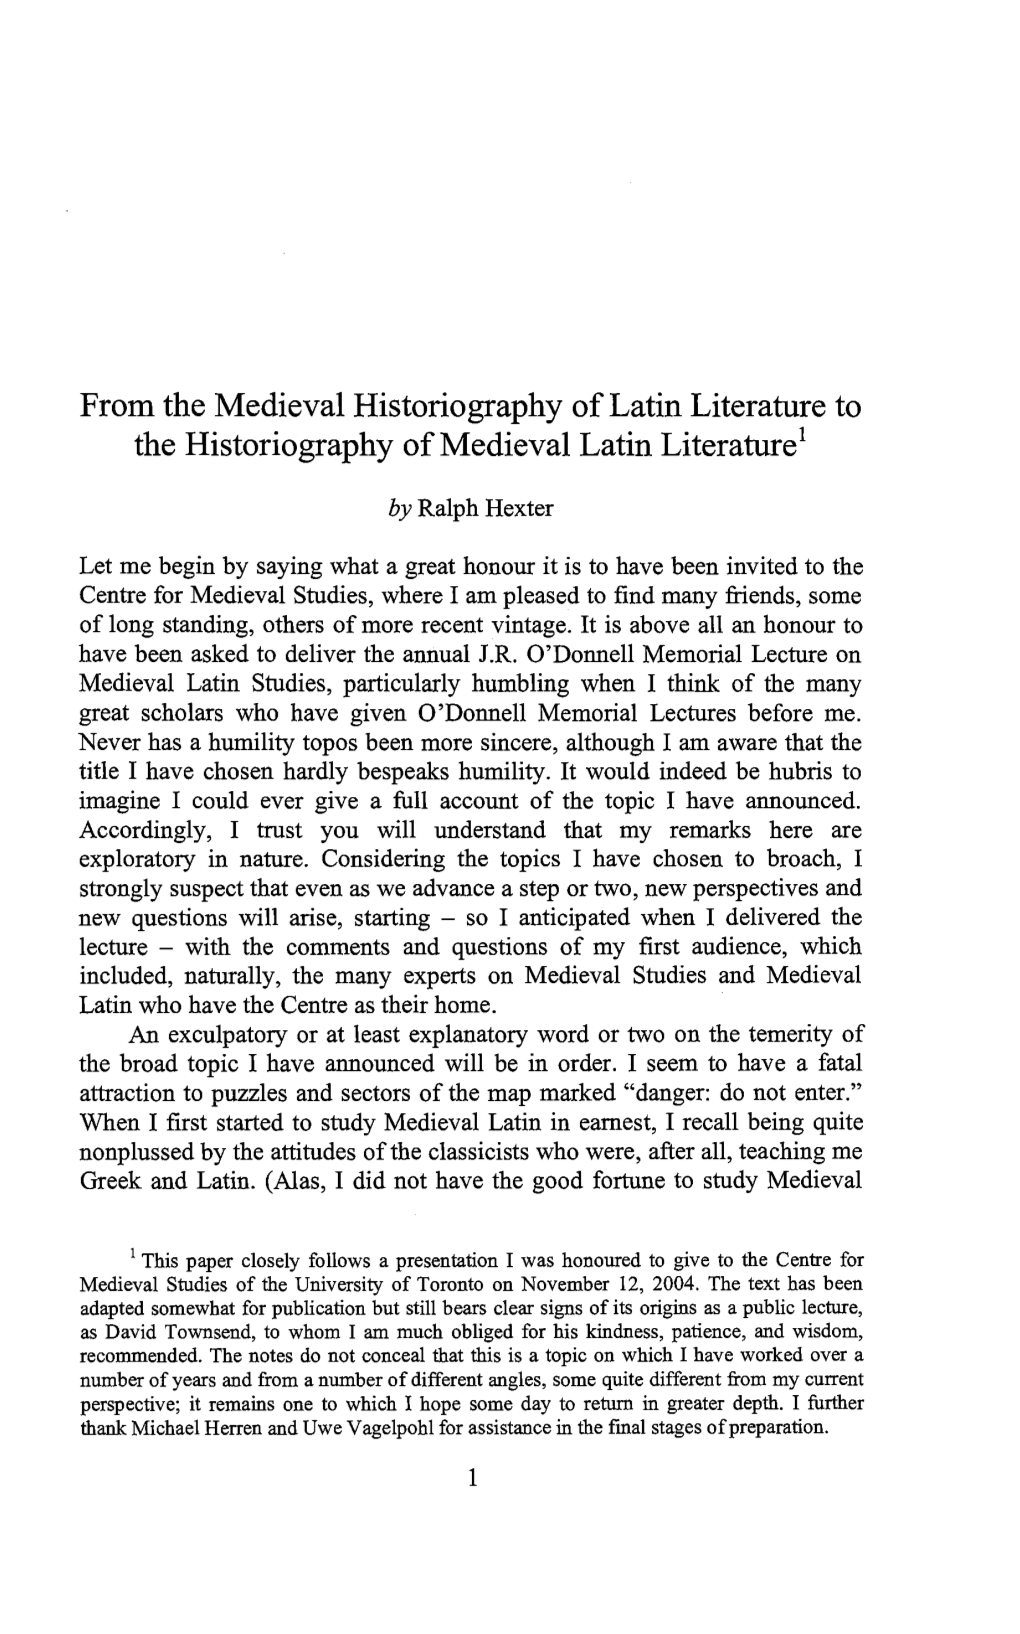 From the Medieval Historiography of Latin Literature to the Historiography of Medieval Latin Literature1